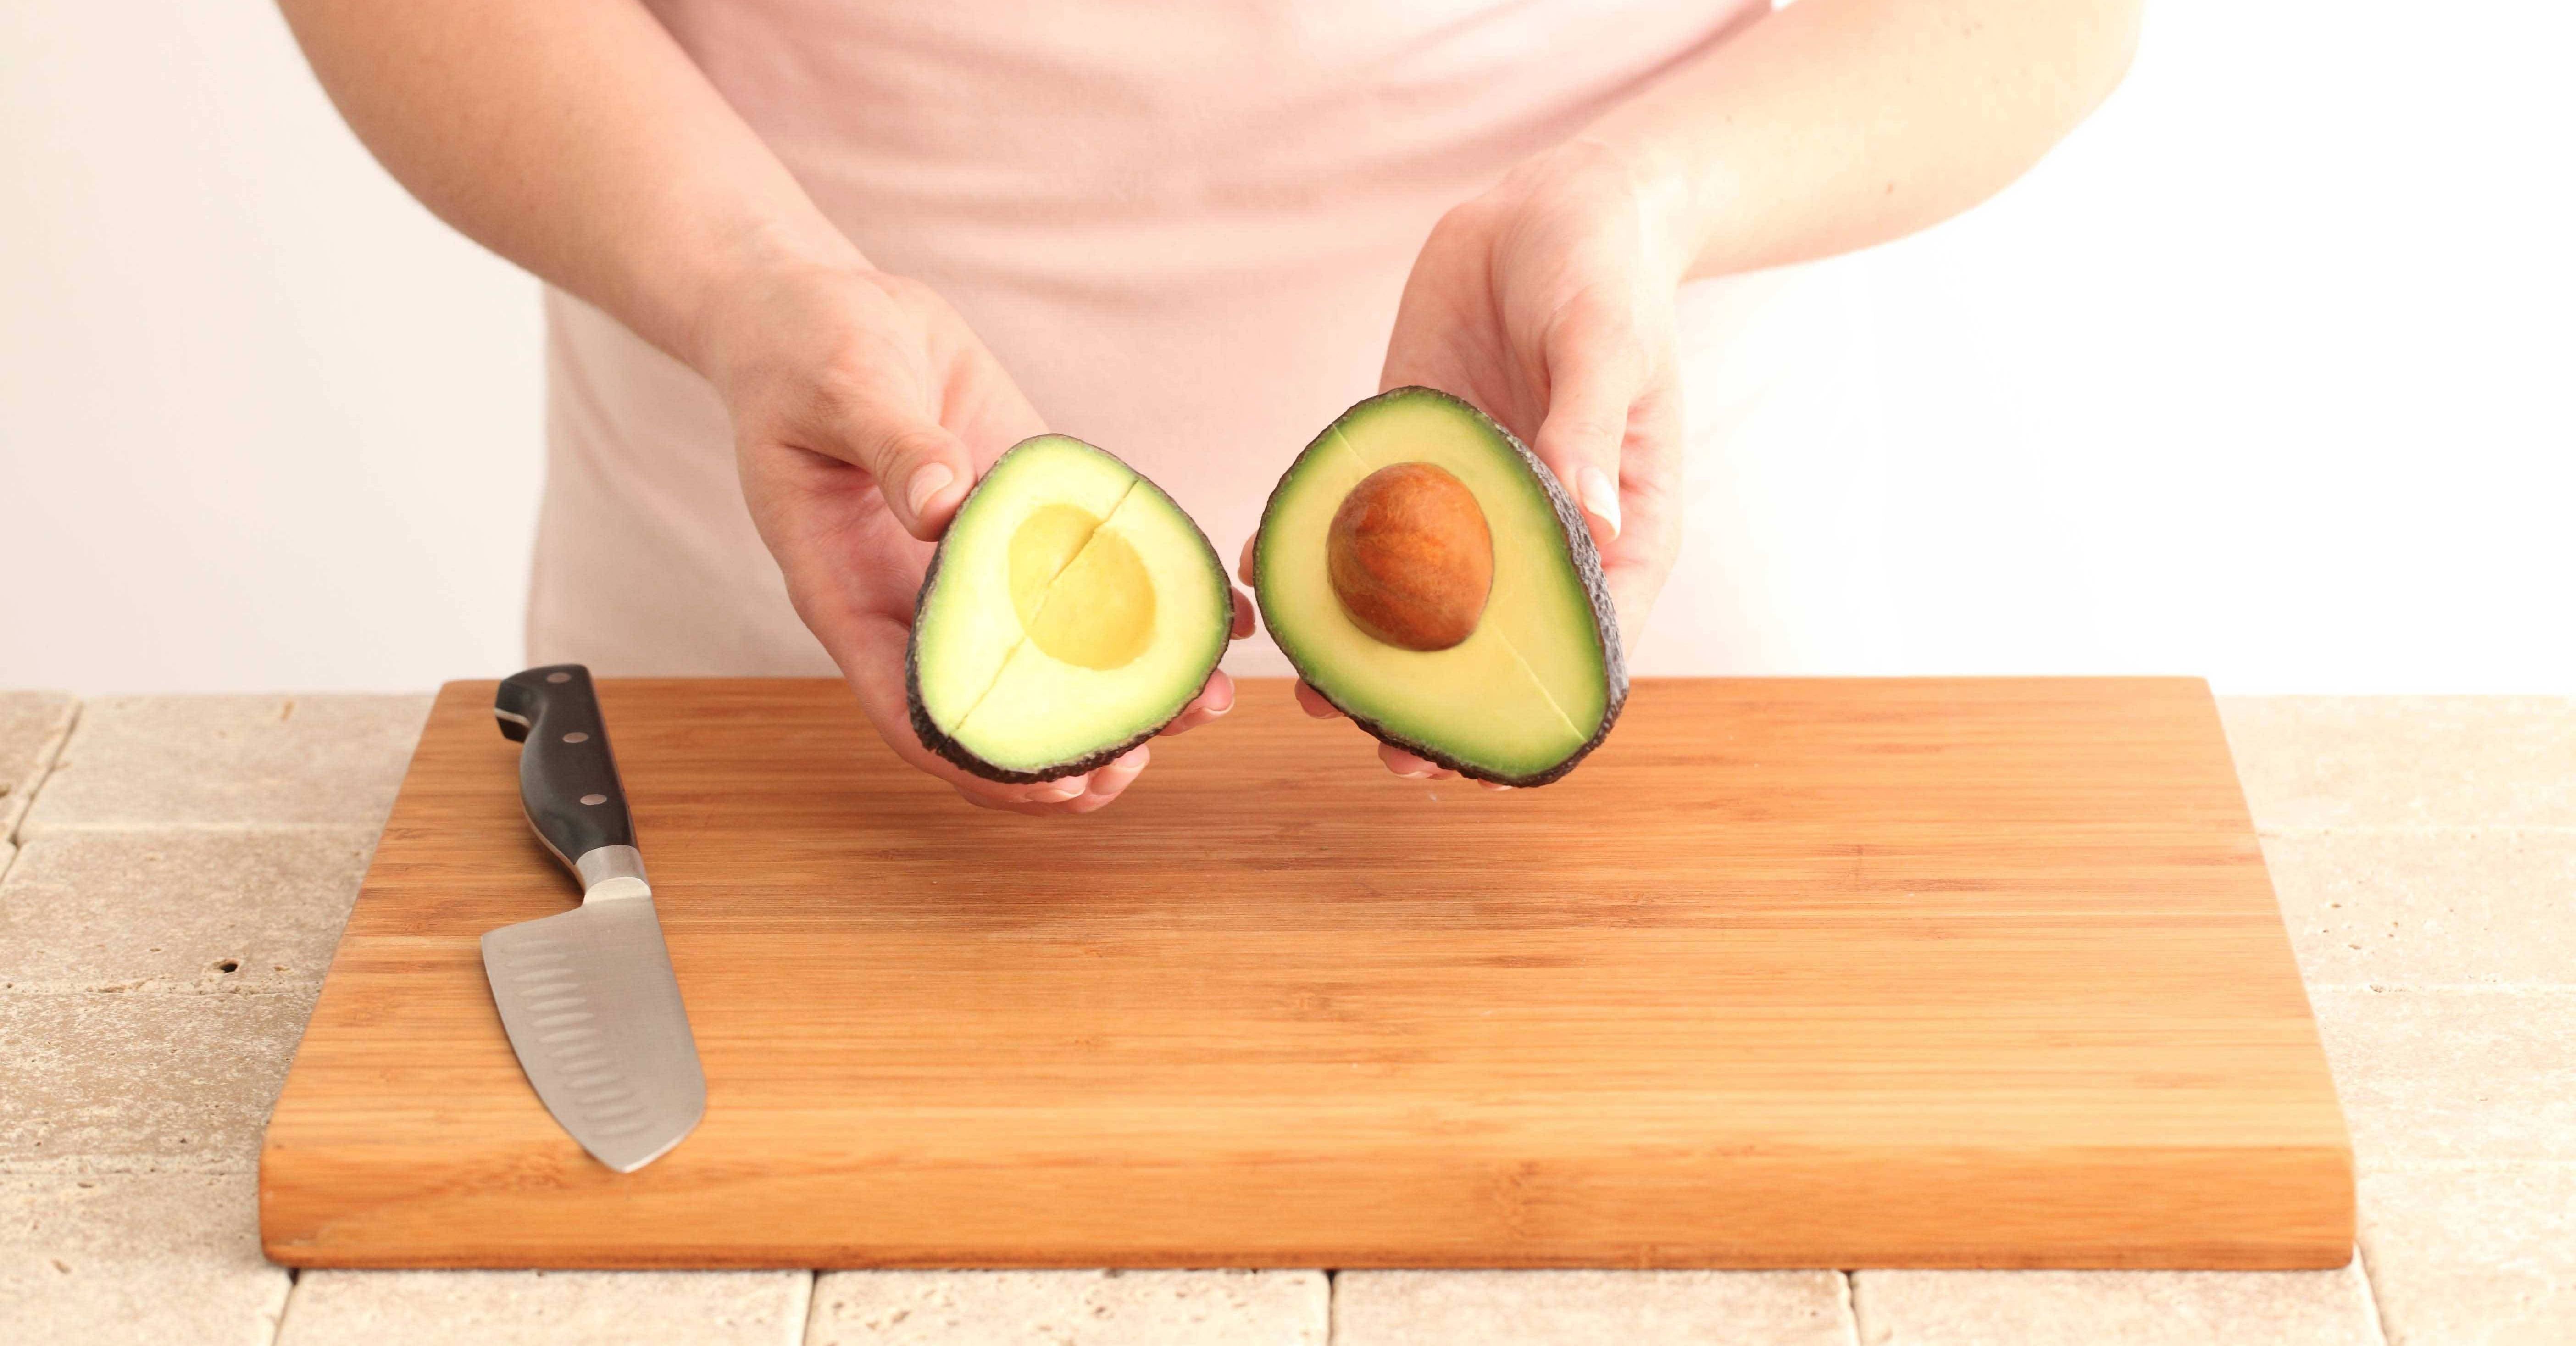 Cut Avocado On Cutting Board With Knife Free Stock Photo and Image 279317778